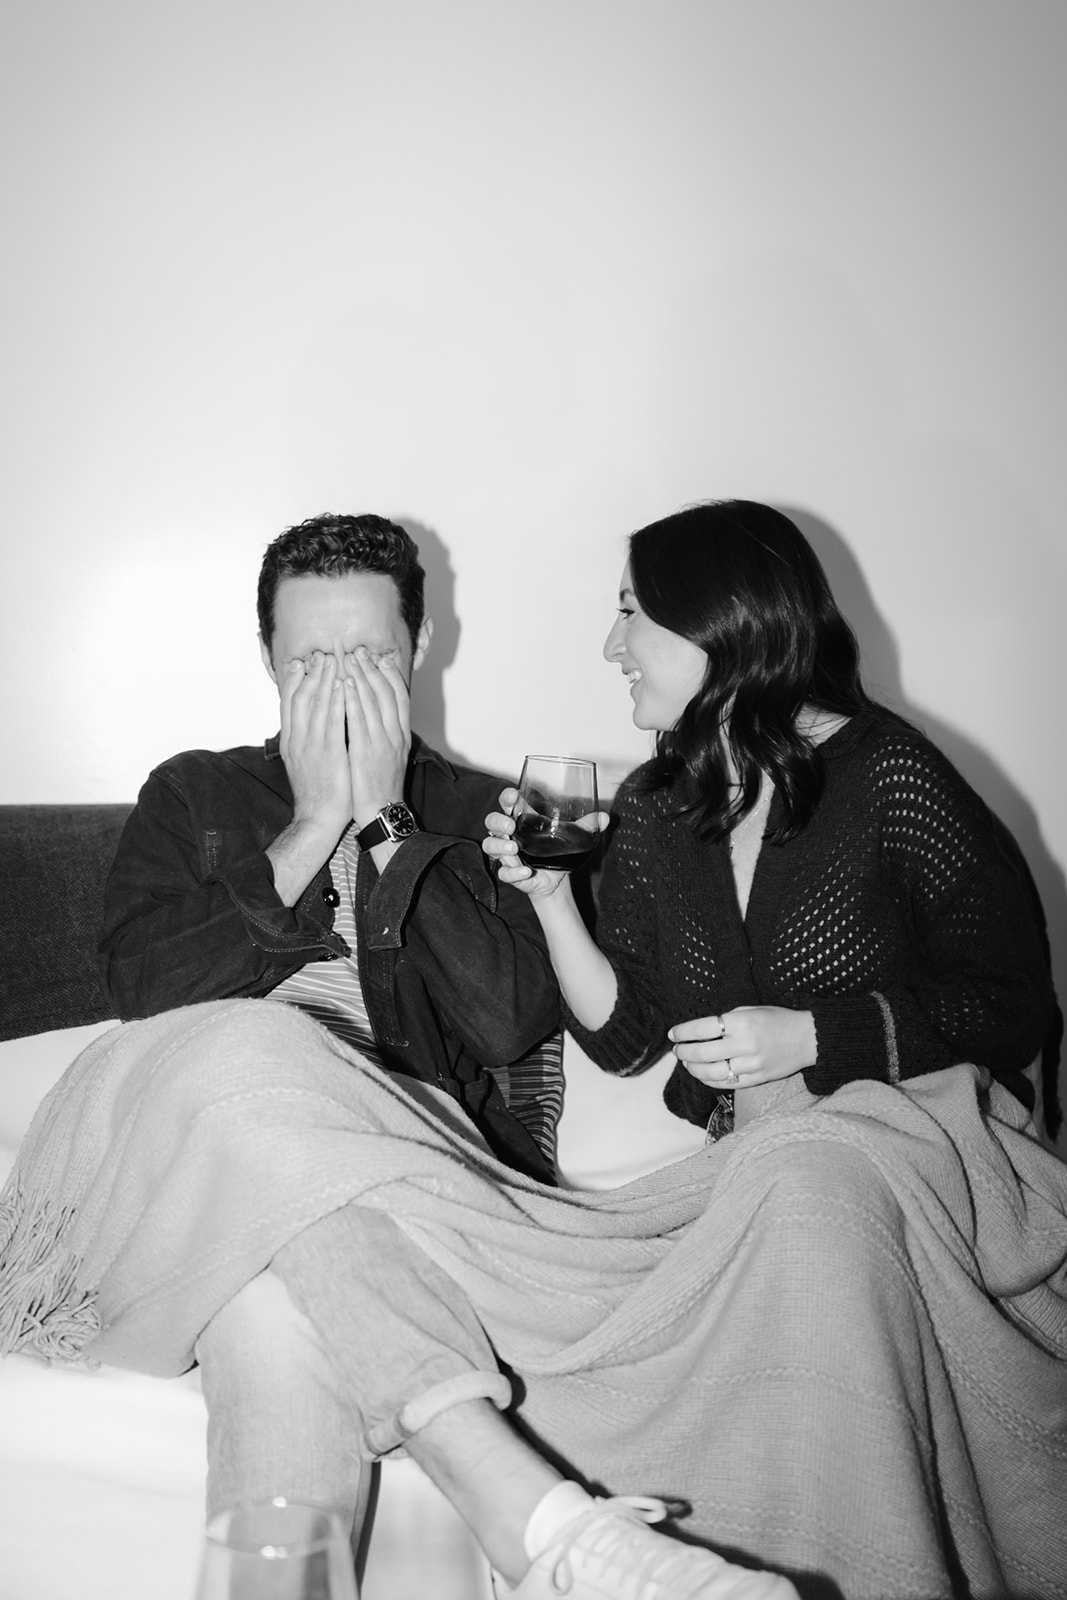 Candid couple drinking a glass of wine cozied up on their couch at home.